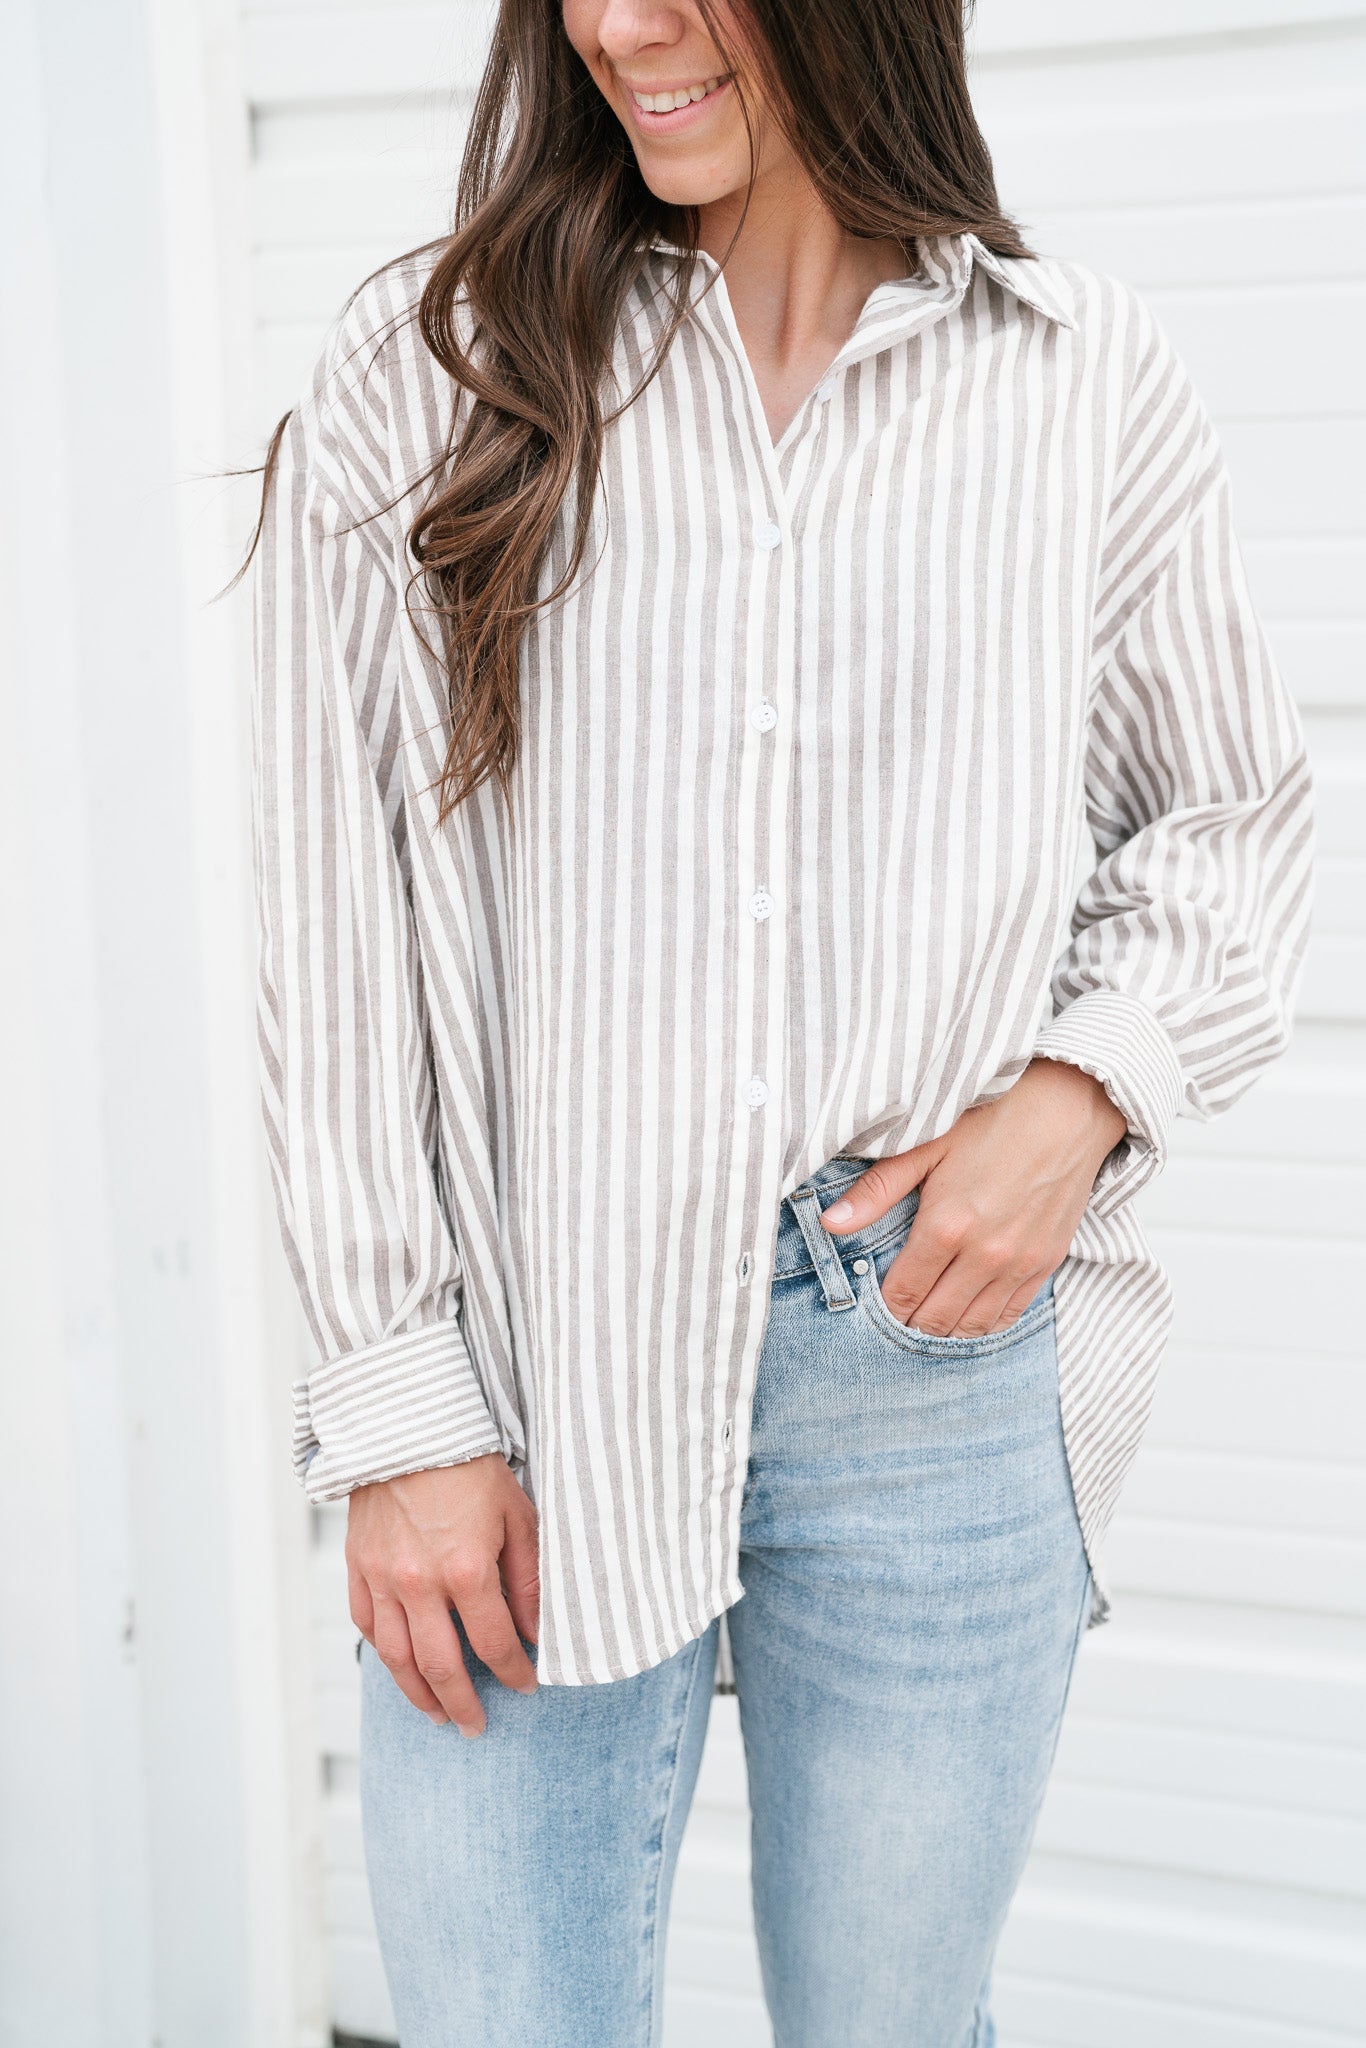 Out Of Line Striped Button Up Top